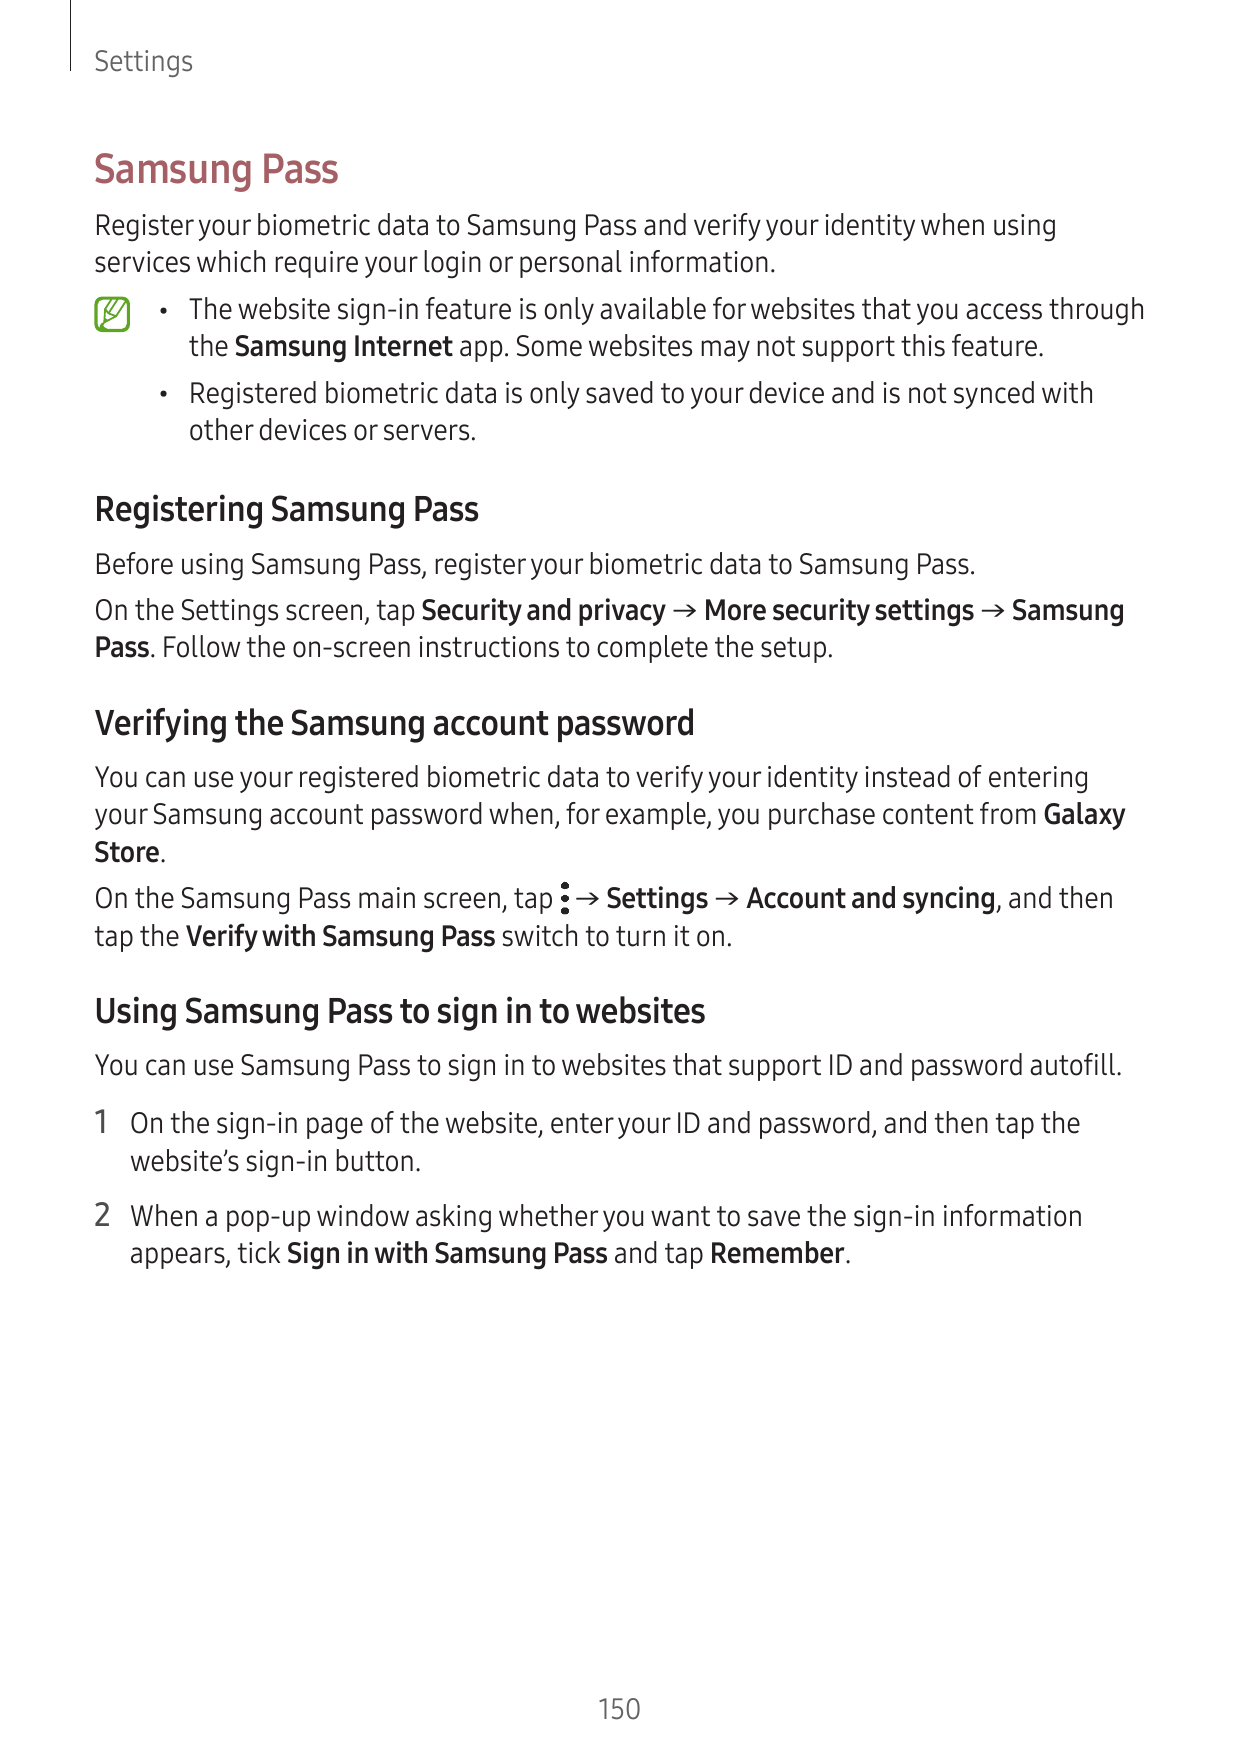 SettingsSamsung PassRegister your biometric data to Samsung Pass and verify your identity when usingservices which require your 